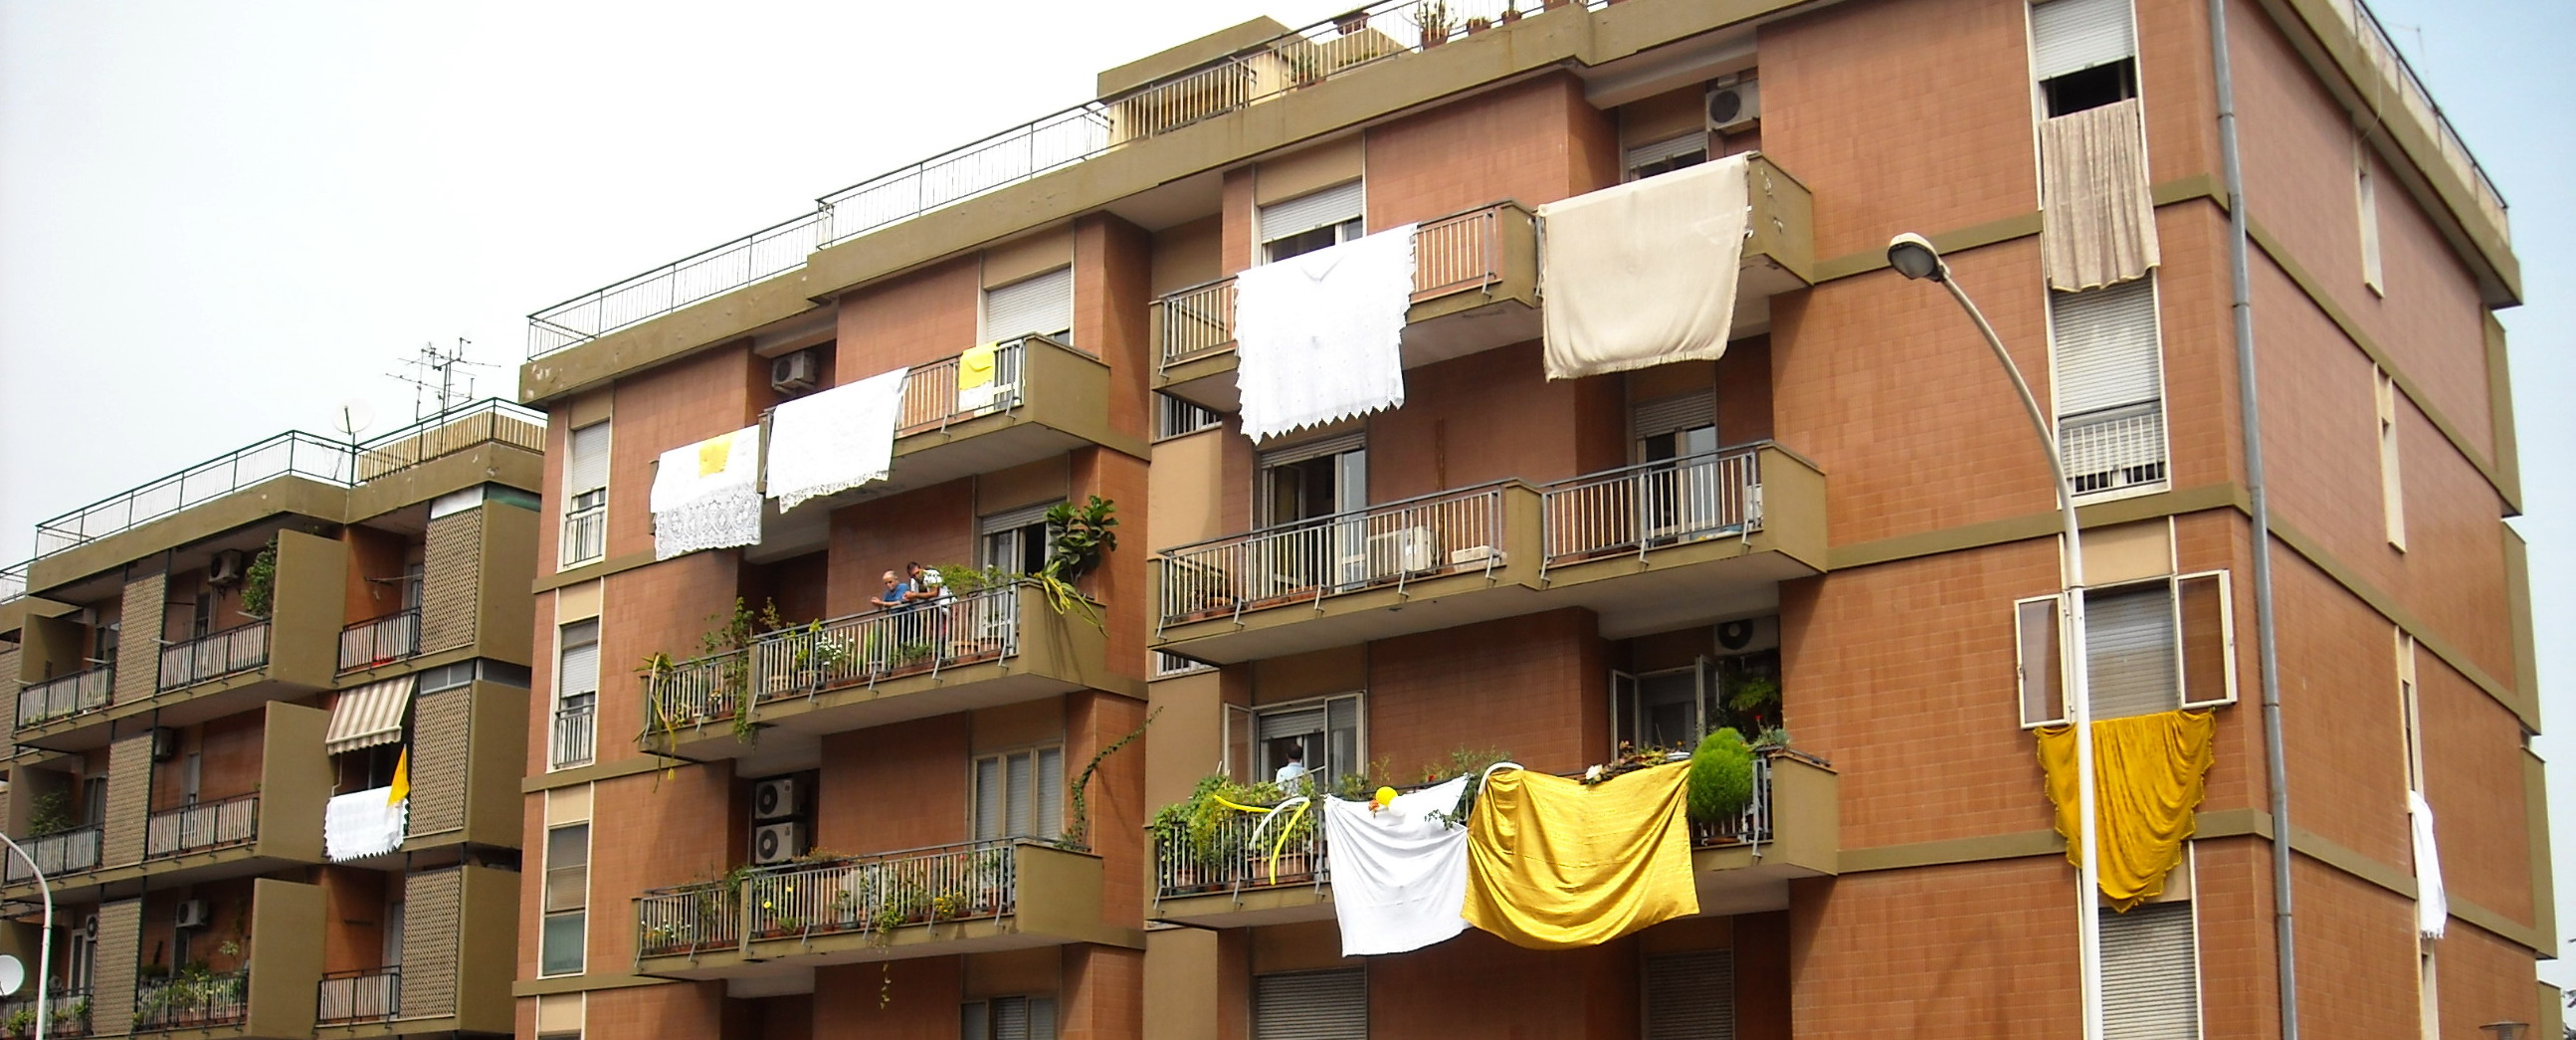 several small houses with colorful clothes hanging from their balconies